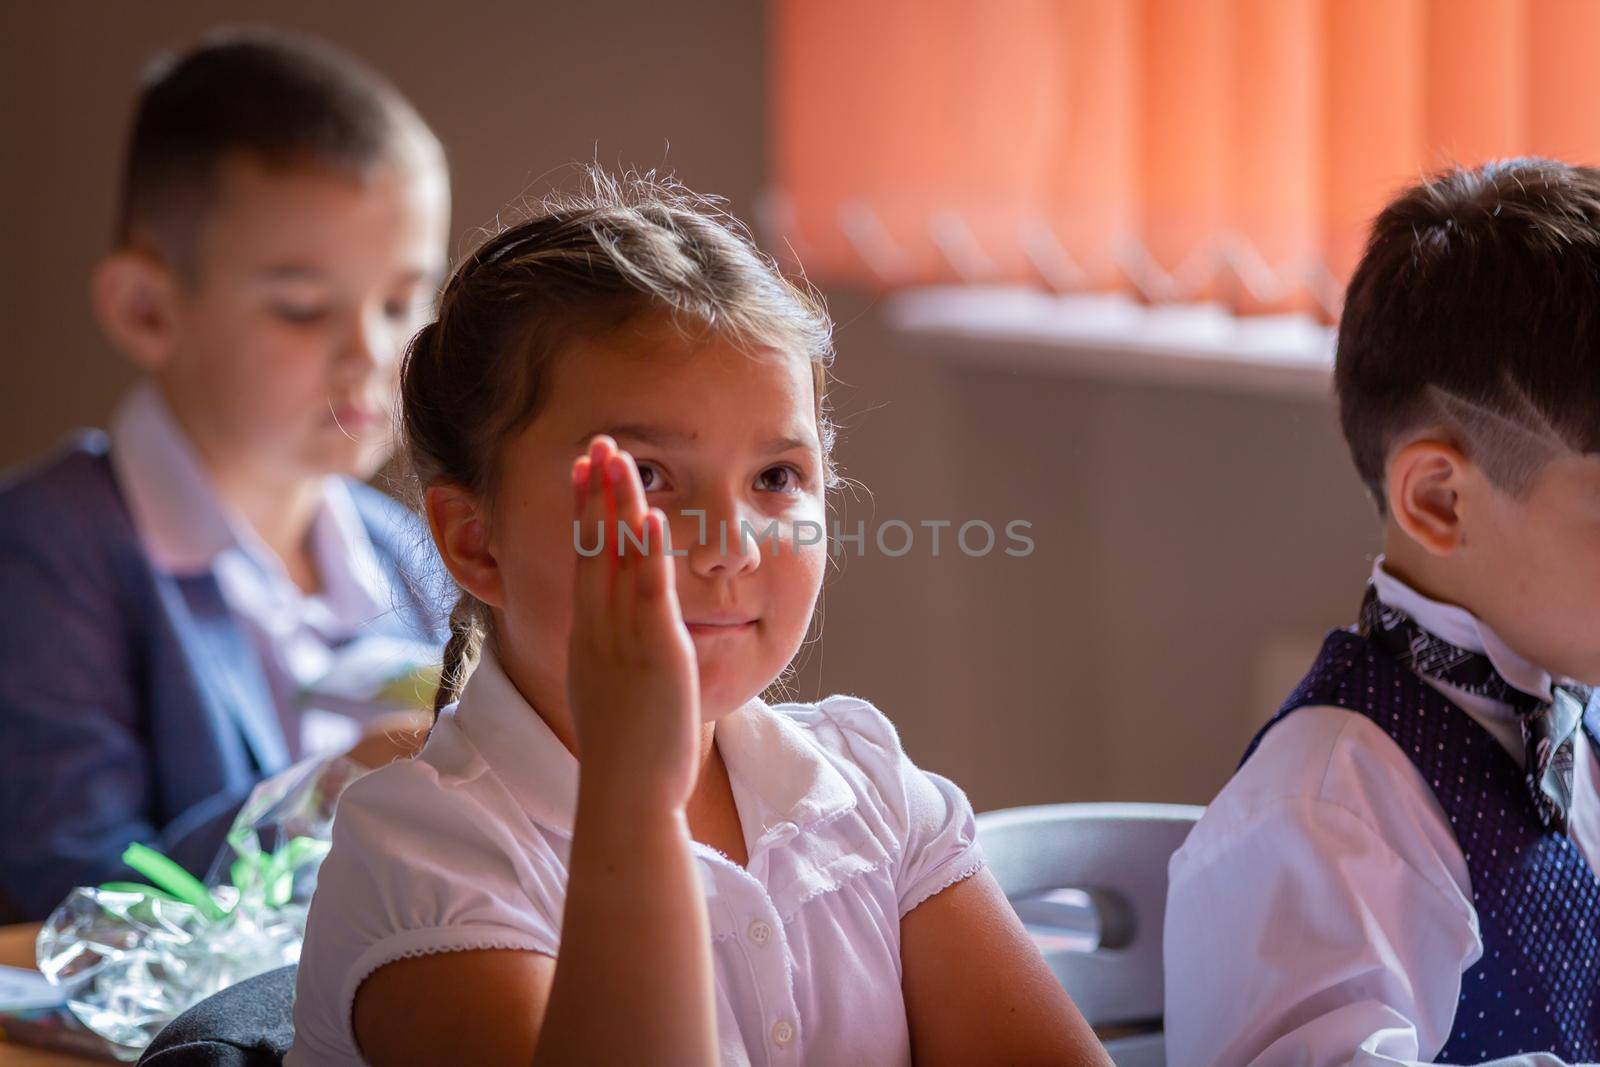 The first grader sits at her desk with her hand raised, wants to answer the teacher. by Yurich32